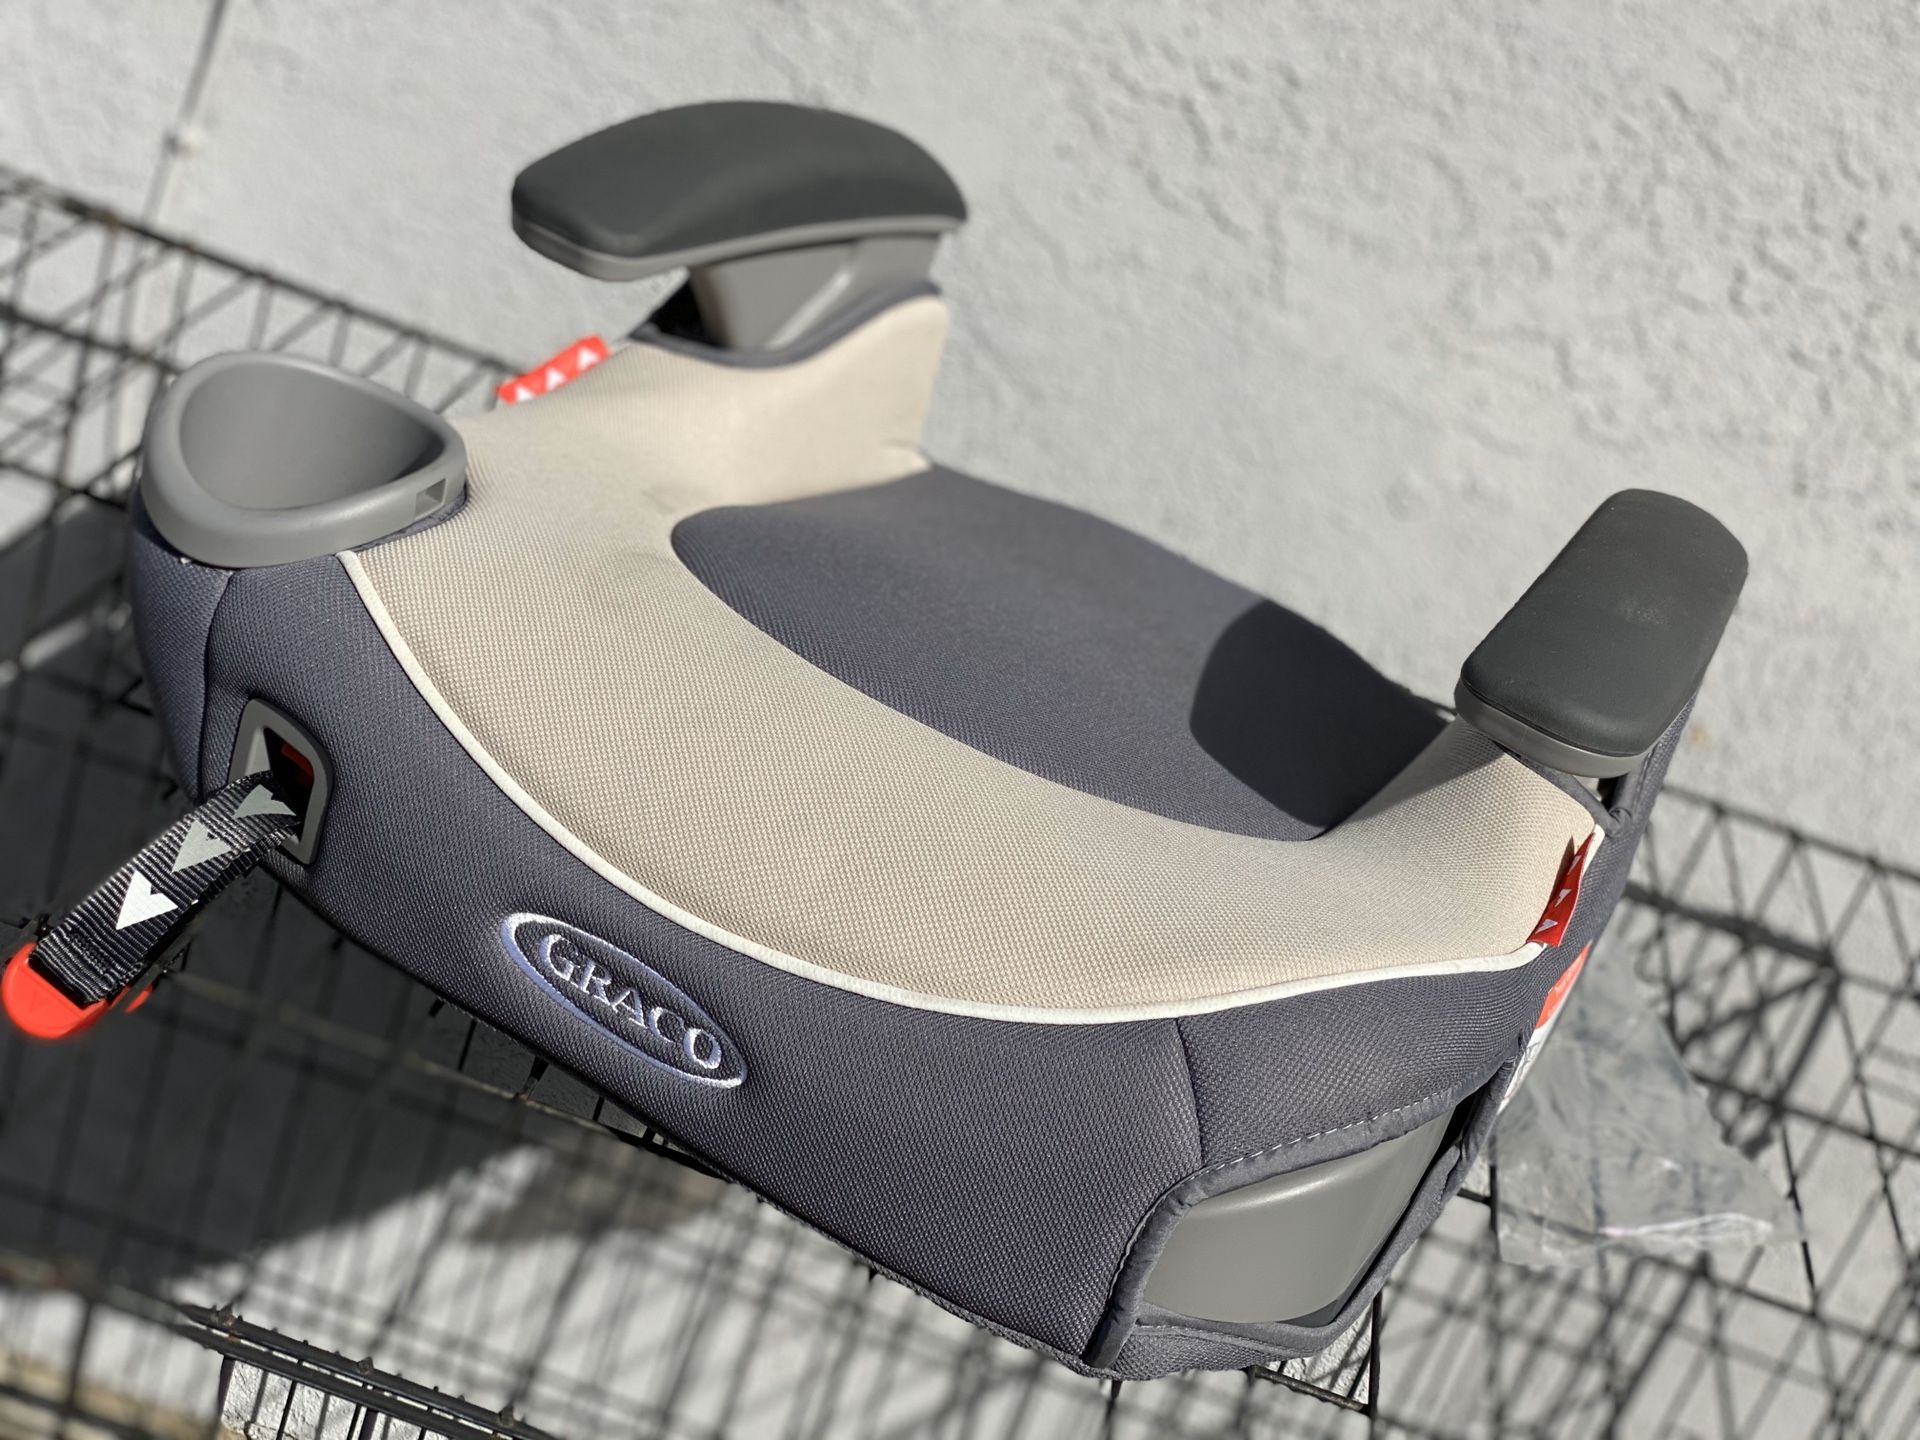 Booster Seat by Graco!